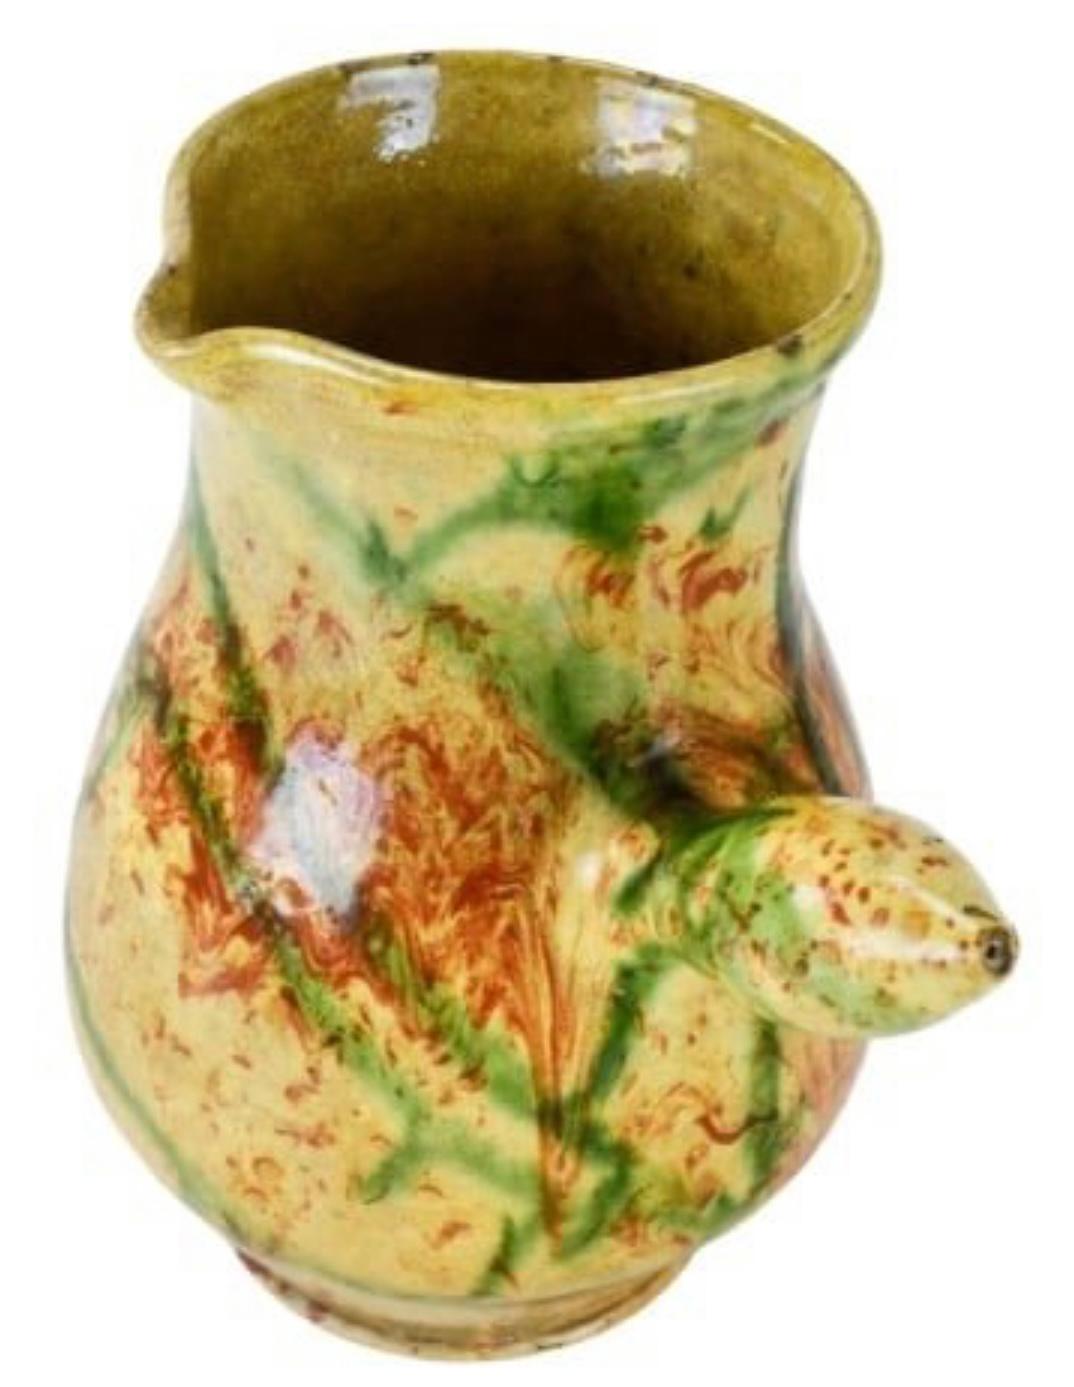 A 19th century French pitcher in terracotta with yellow and marbelized glaze from the Alps region, circa 1870. 